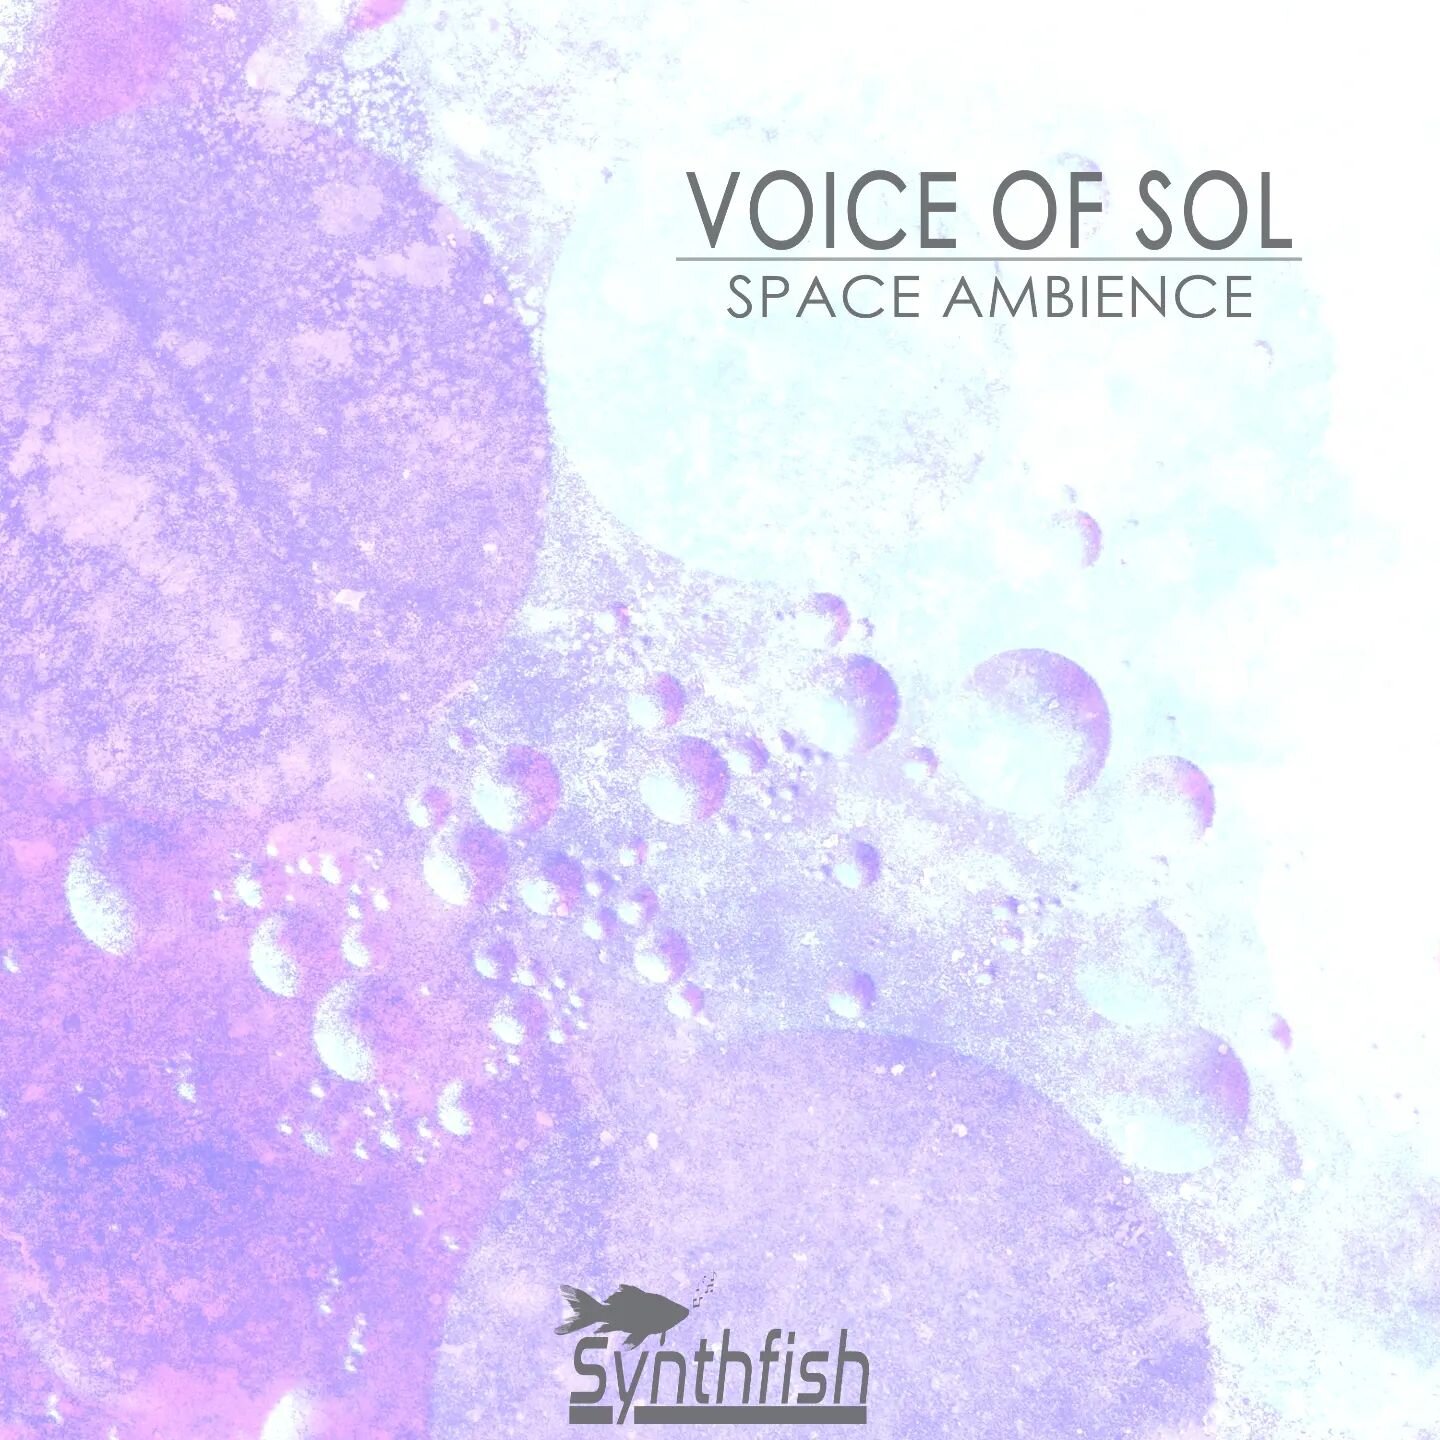 Out now: VOICE OF SOL, a space ambient album by Adam Mullen and Michael Ferlitsch. 

Stream:
https://distrokid.com/hyperfollow/synthfish/voice-of-sol

🎶 You can find all Synthfish releases &amp; links here:
campsite.bio/synthfish

#indiemusic #synth